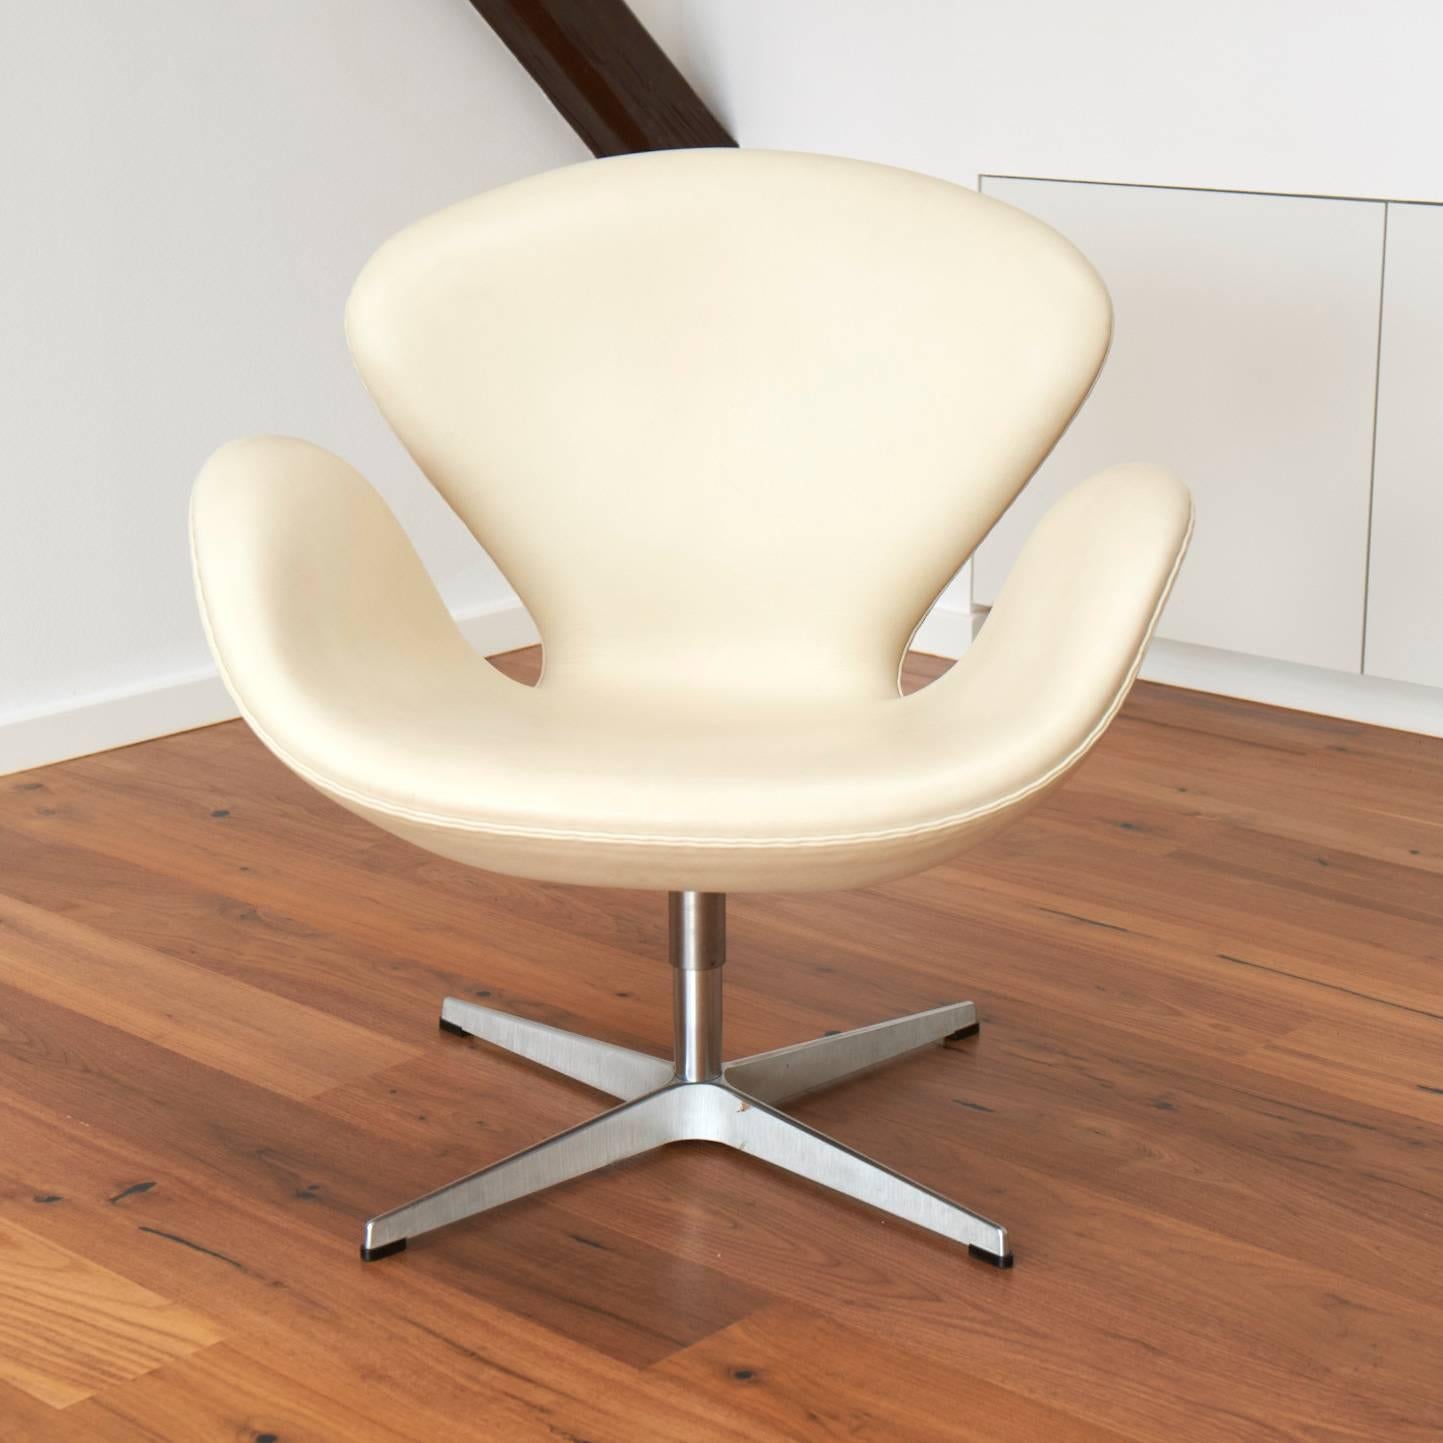 A beautiful pair of Arne Jacobsen 3320 Swan chairs in creme white leather.
The chairs are in a good condition.